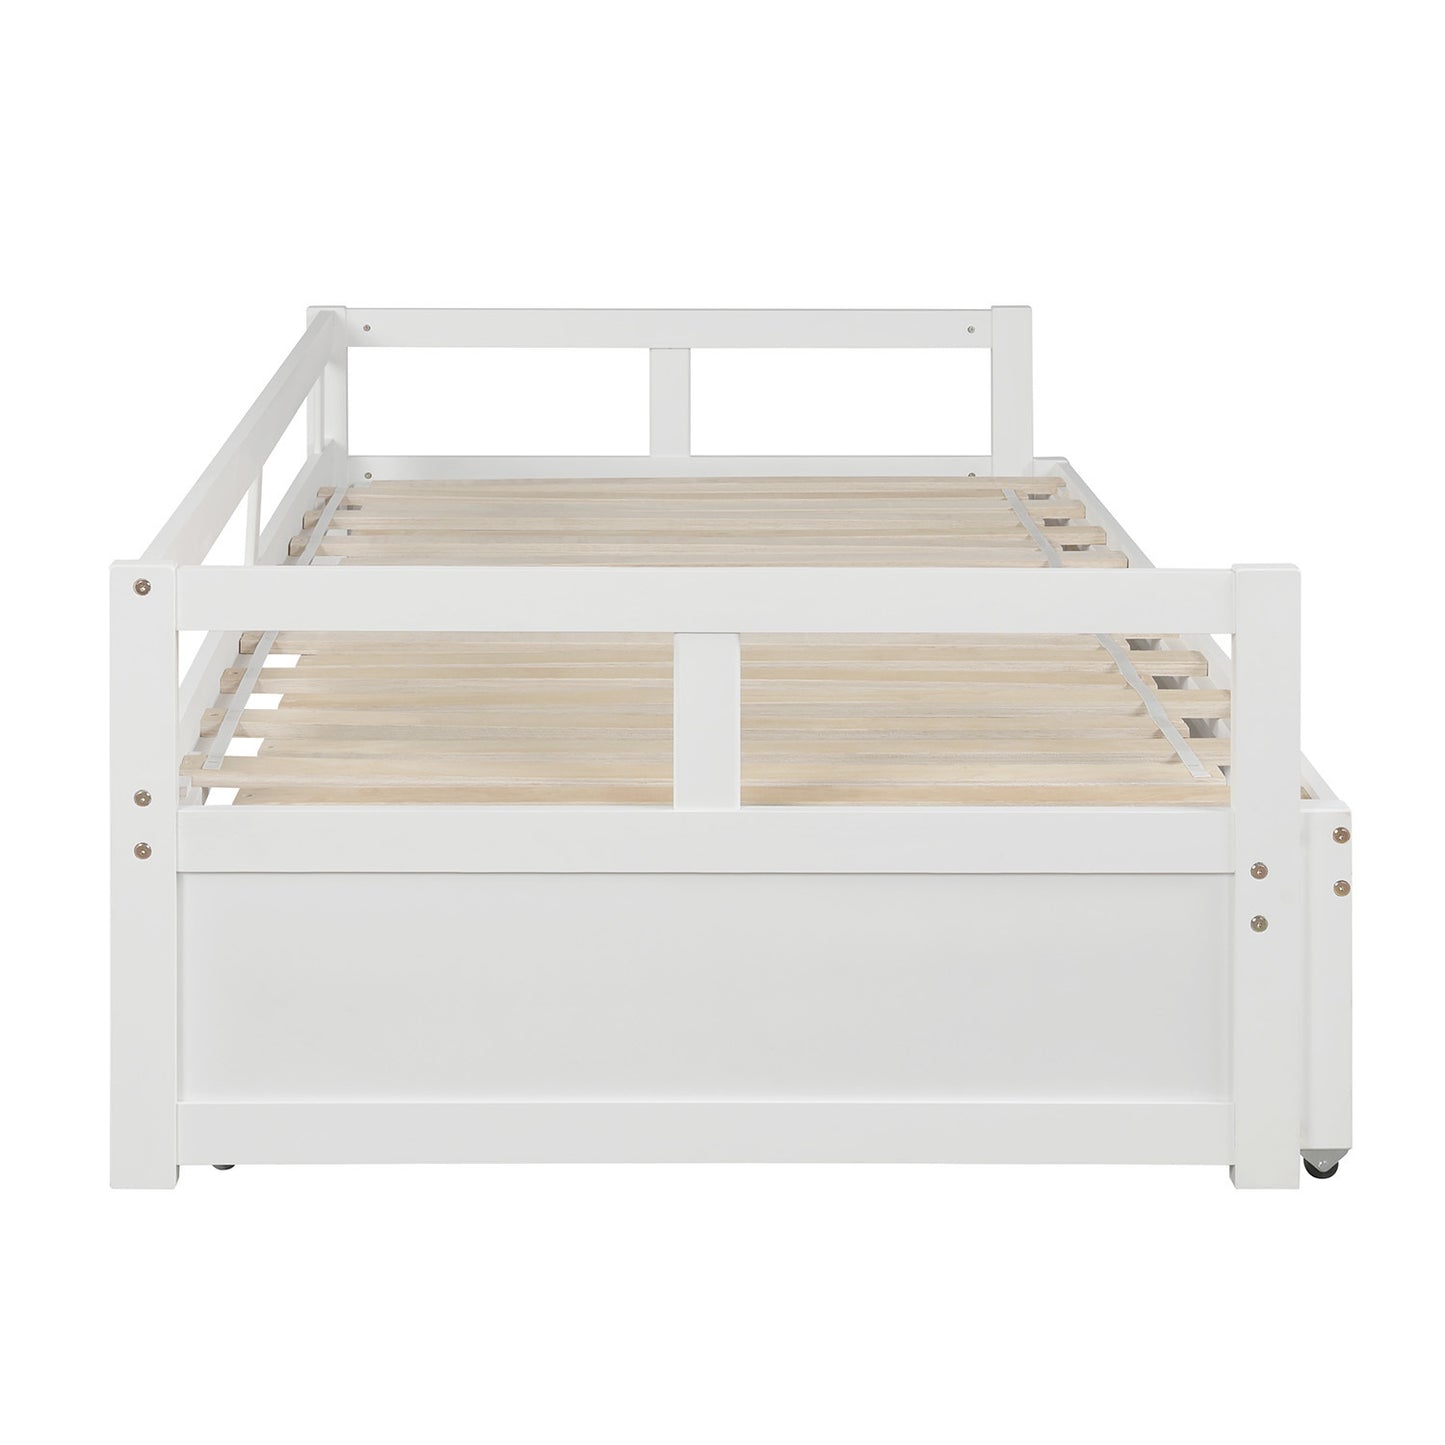 Extending Daybed with Trundle, Wooden Daybed with Trundle, White